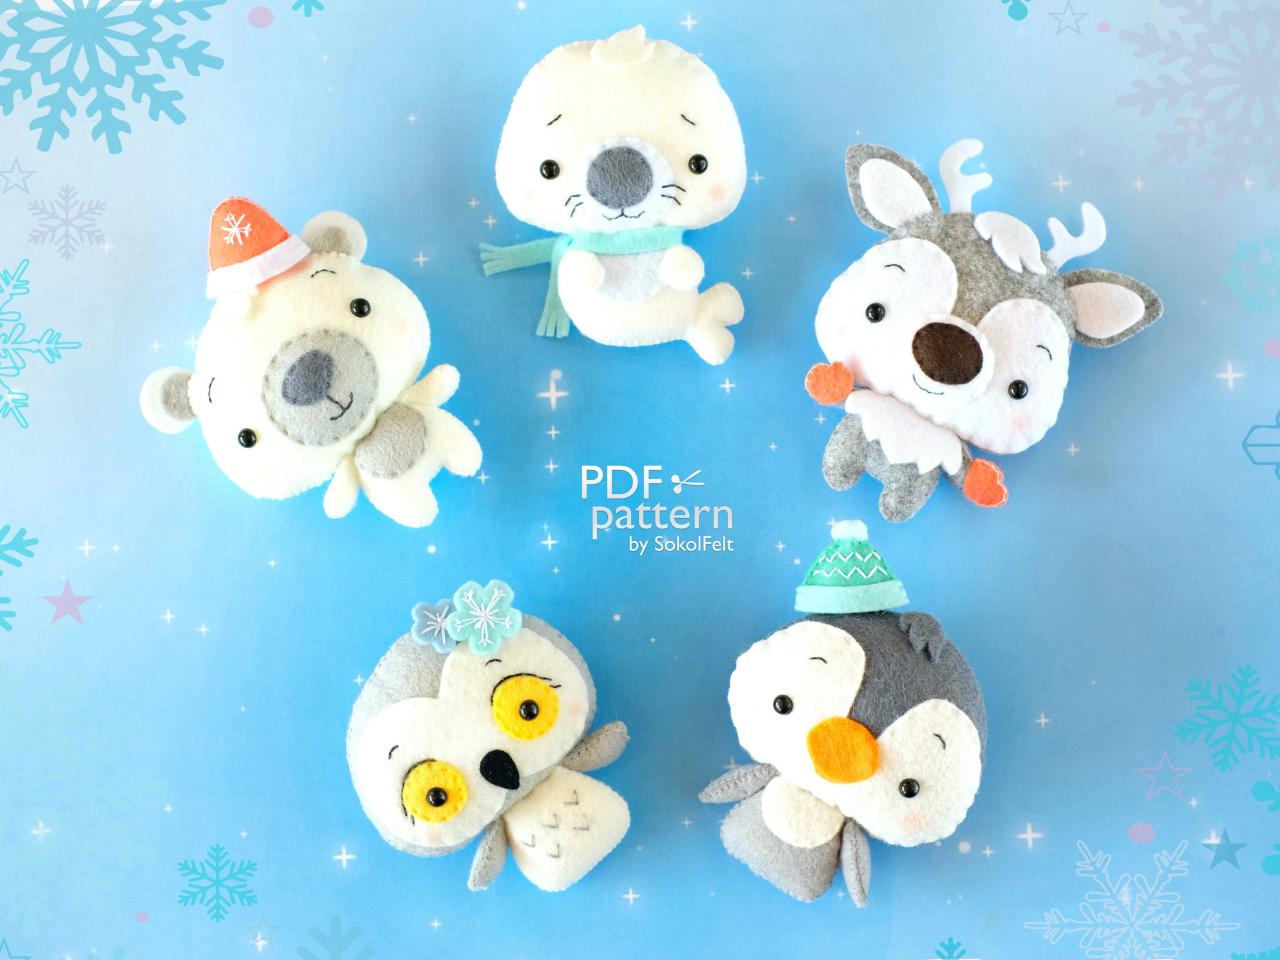 Set Of 5 Christmas Animal Toy Pdf And Svg Patterns, Winter Polar Animals, Felt Penguin, Owl, Reindeer, Seal And White Bear, Baby Mobile Toys